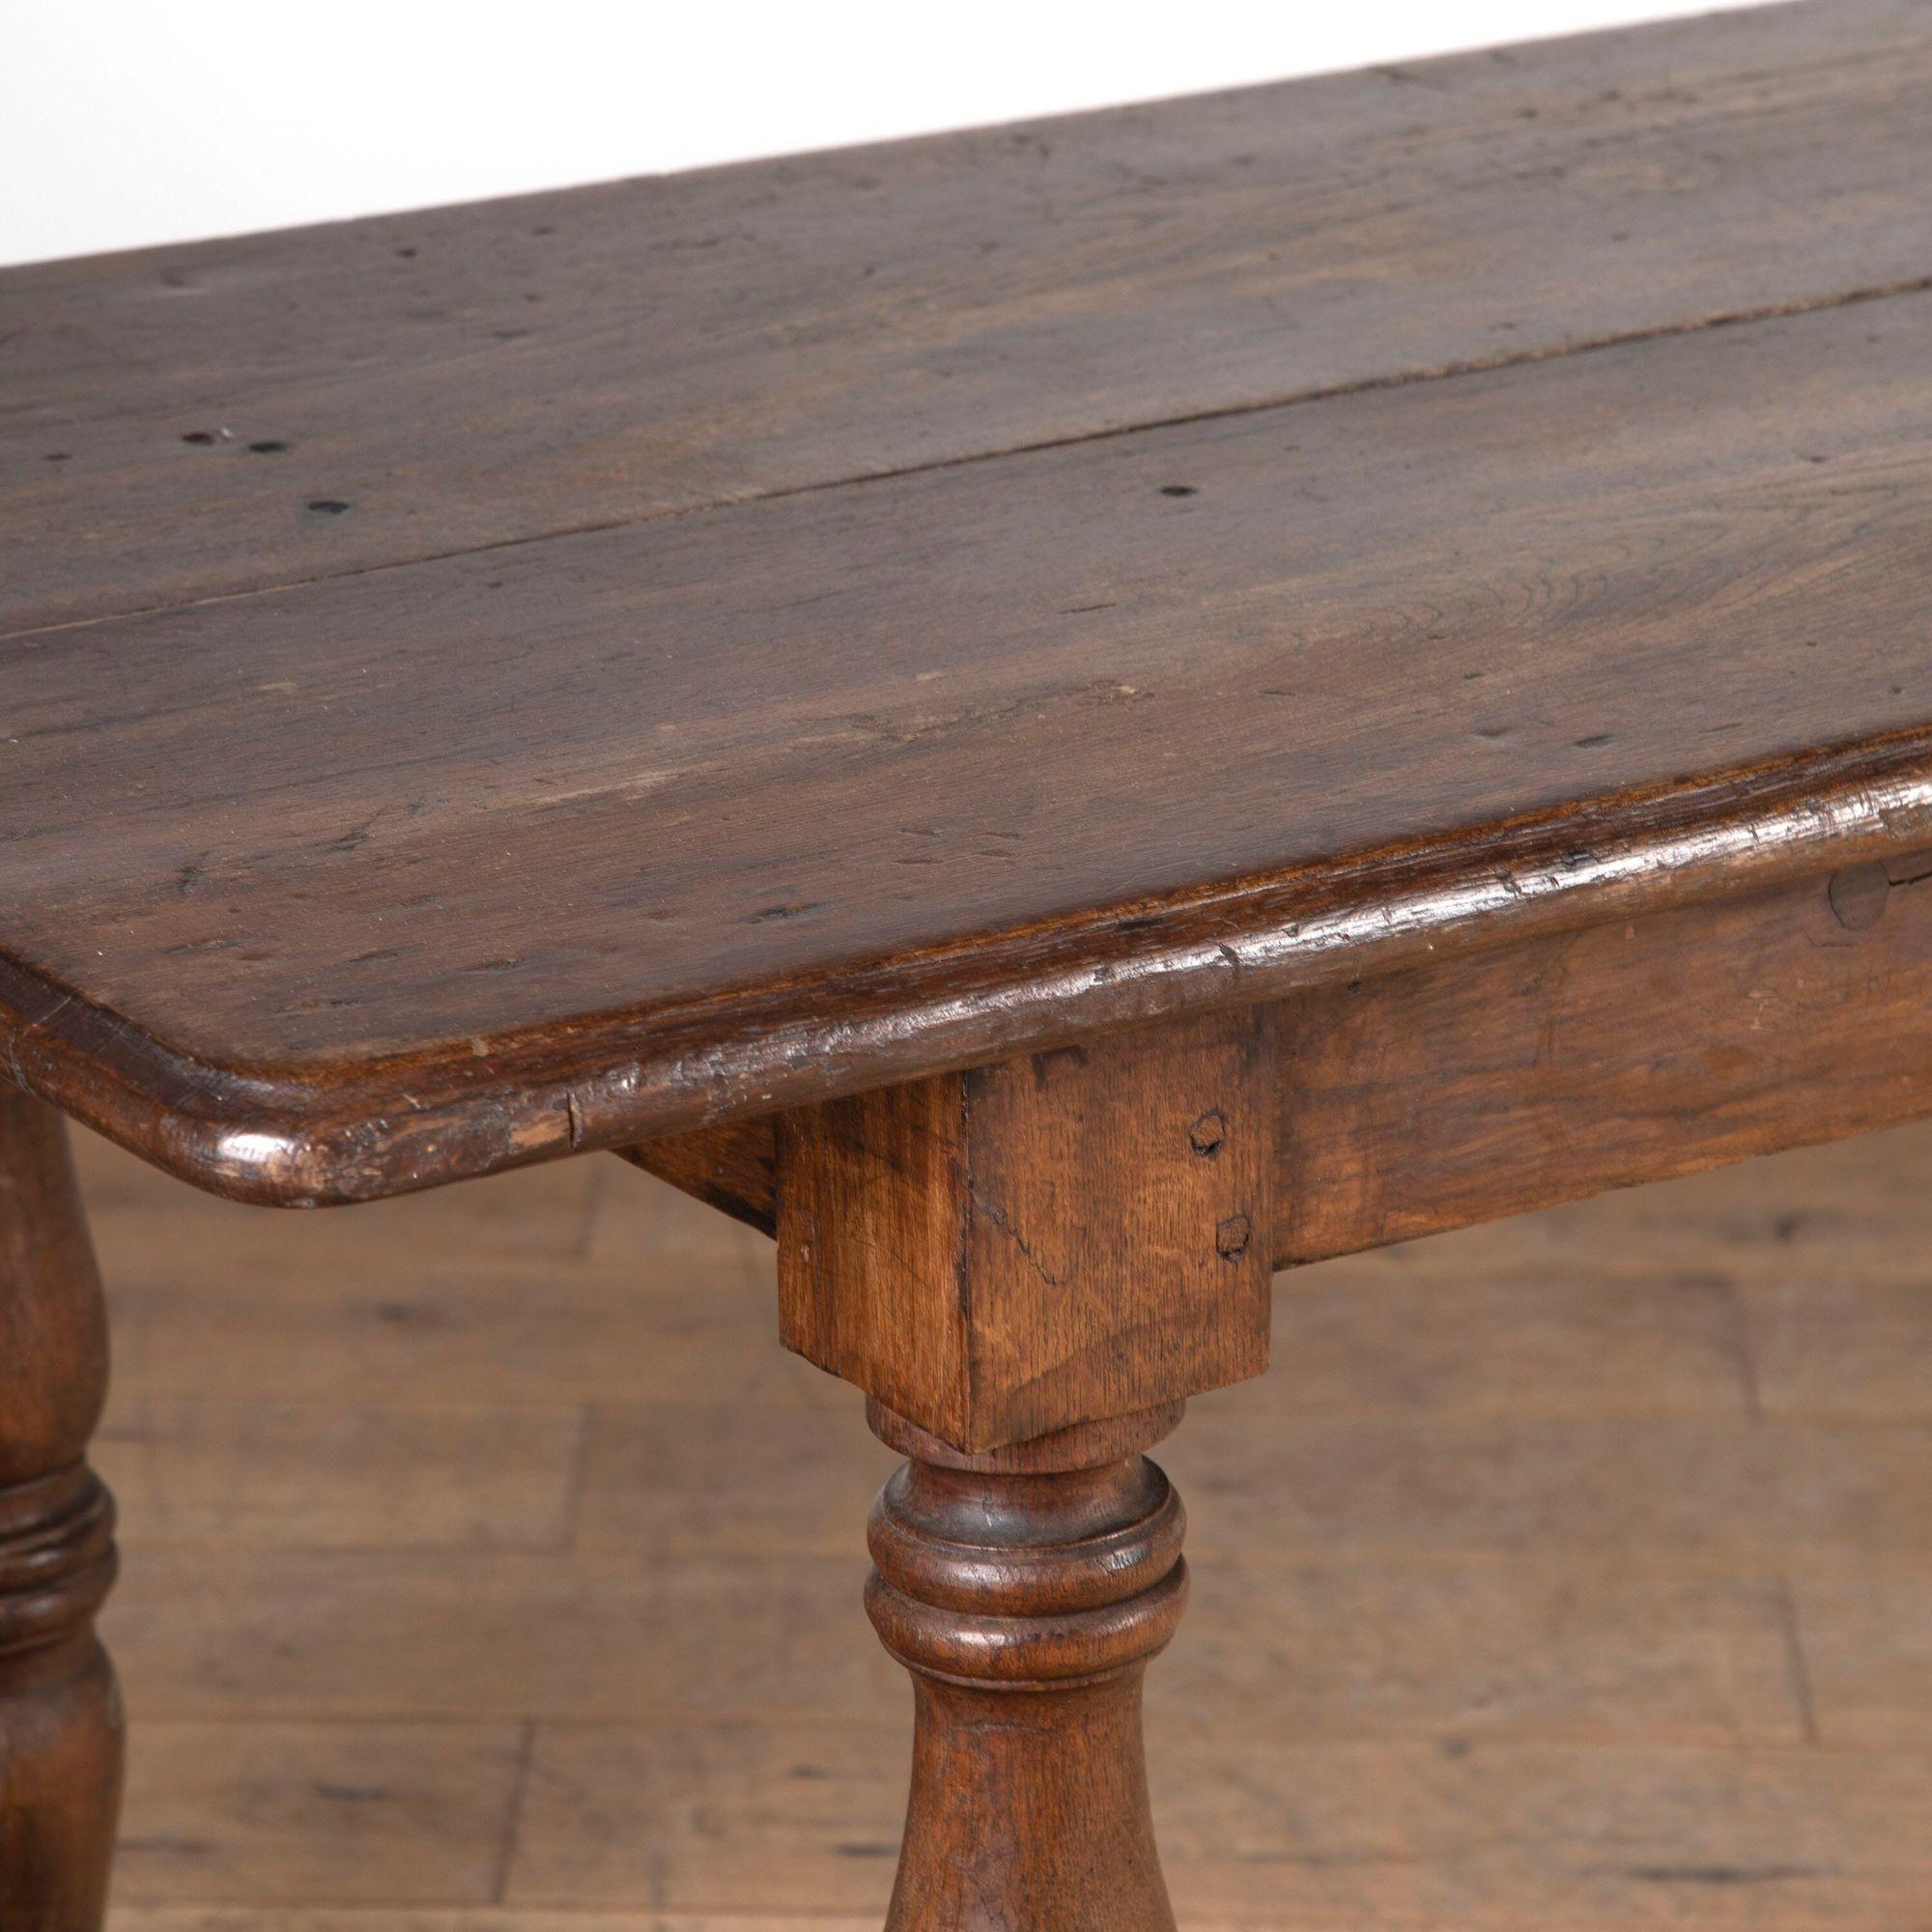 Wonderful 19th century French oak dining table.
A twin planked top and shaped edge sit upon turned supports with square-cut stretchers.
This fabulous dining table seats 8-10 comfortably.